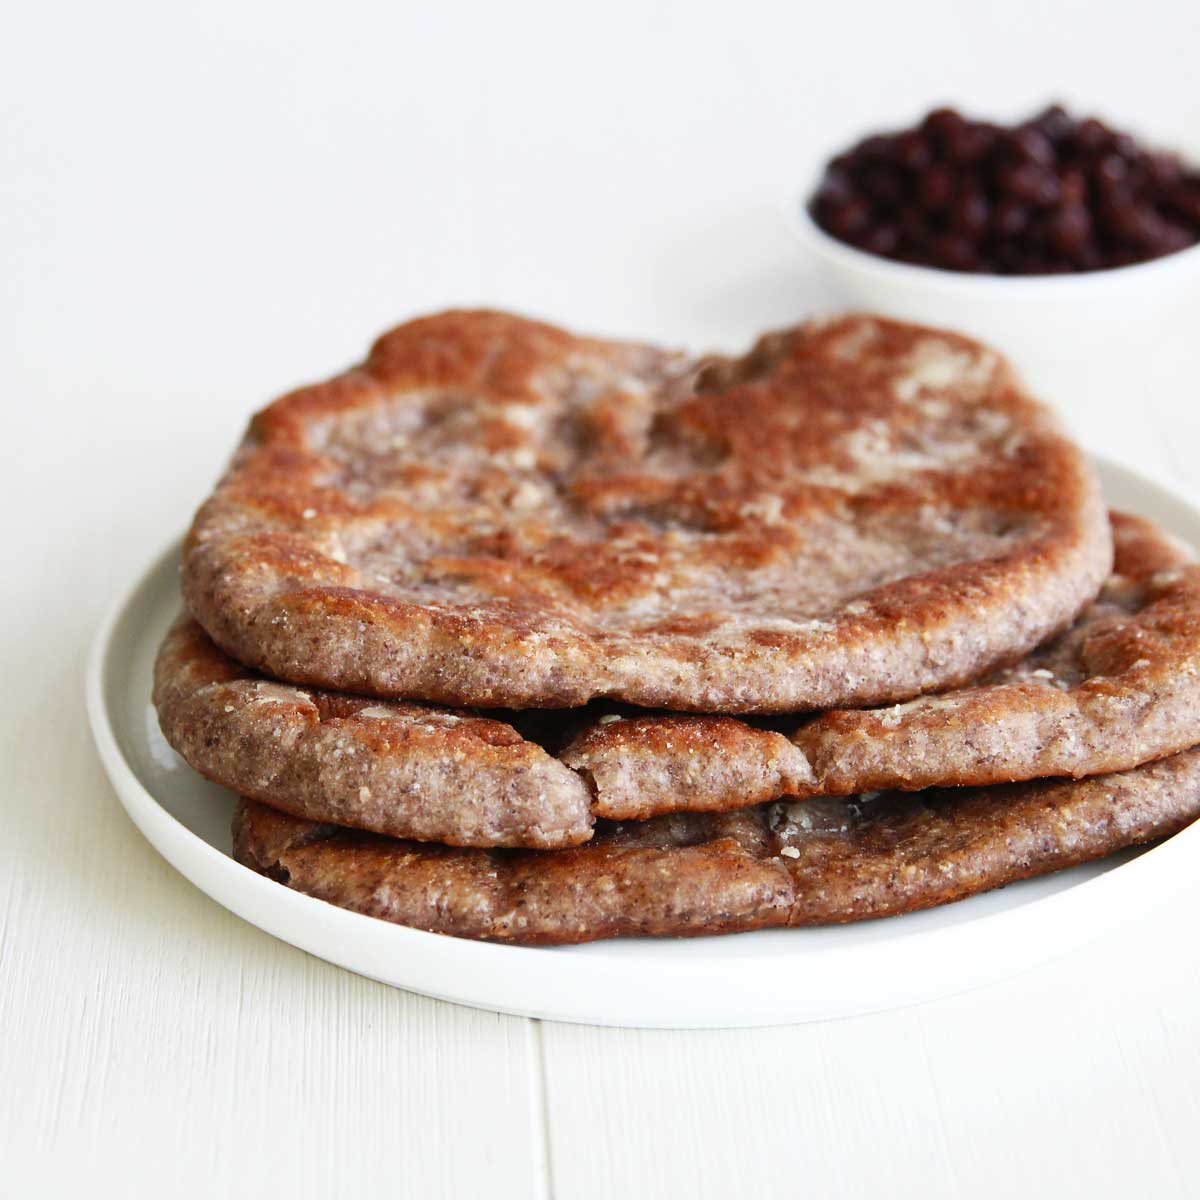 Black Bean Naan (Lower Carb Flatbread Made with Canned Black Beans) - Roasted Corn Naan